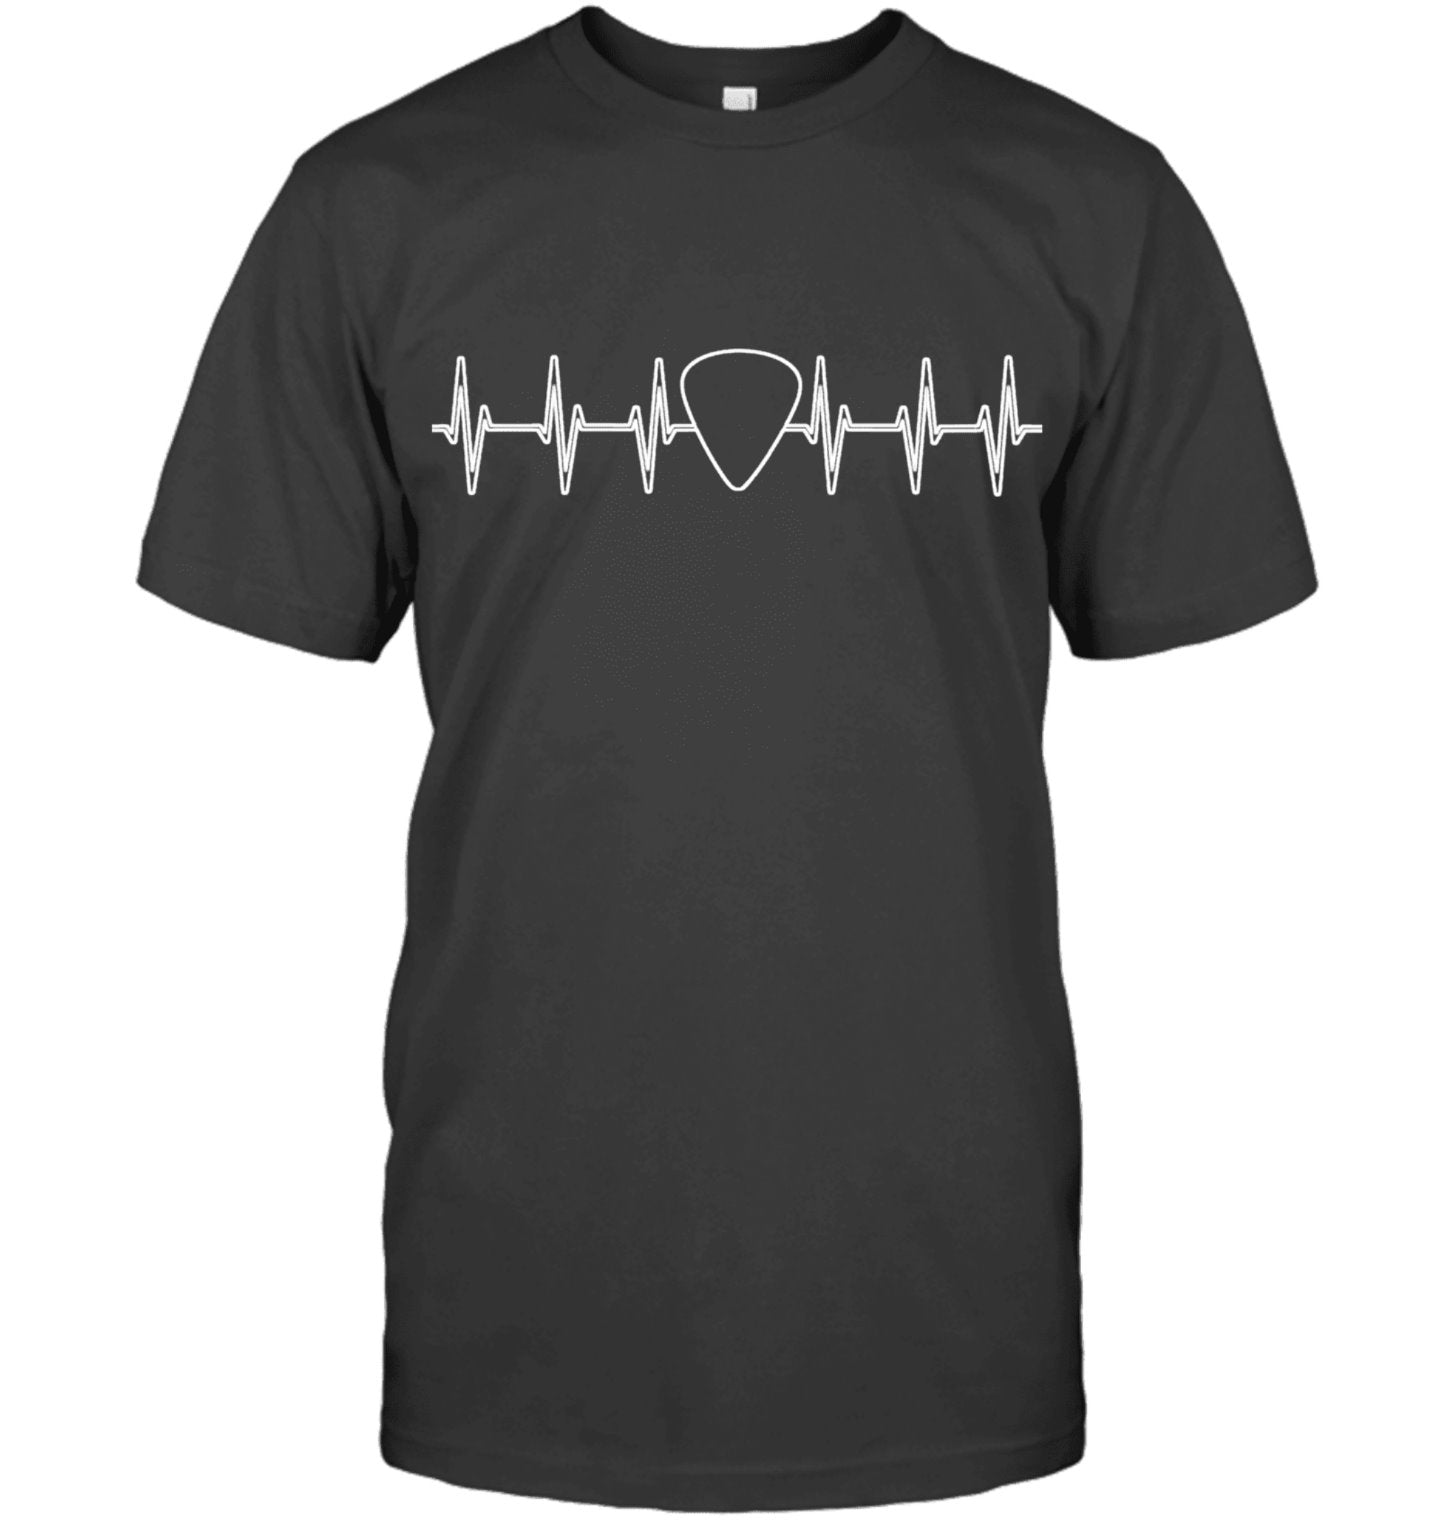 Funny Guitar T-Shirt "Guitarist Pulse" by Axe Dr. Apparel shop.AxeDr.com AxeDr., AxeDr. Guitar Tees & Hoodies, Brand New, christmas gift, Custom Product, fender t-shirt, gif